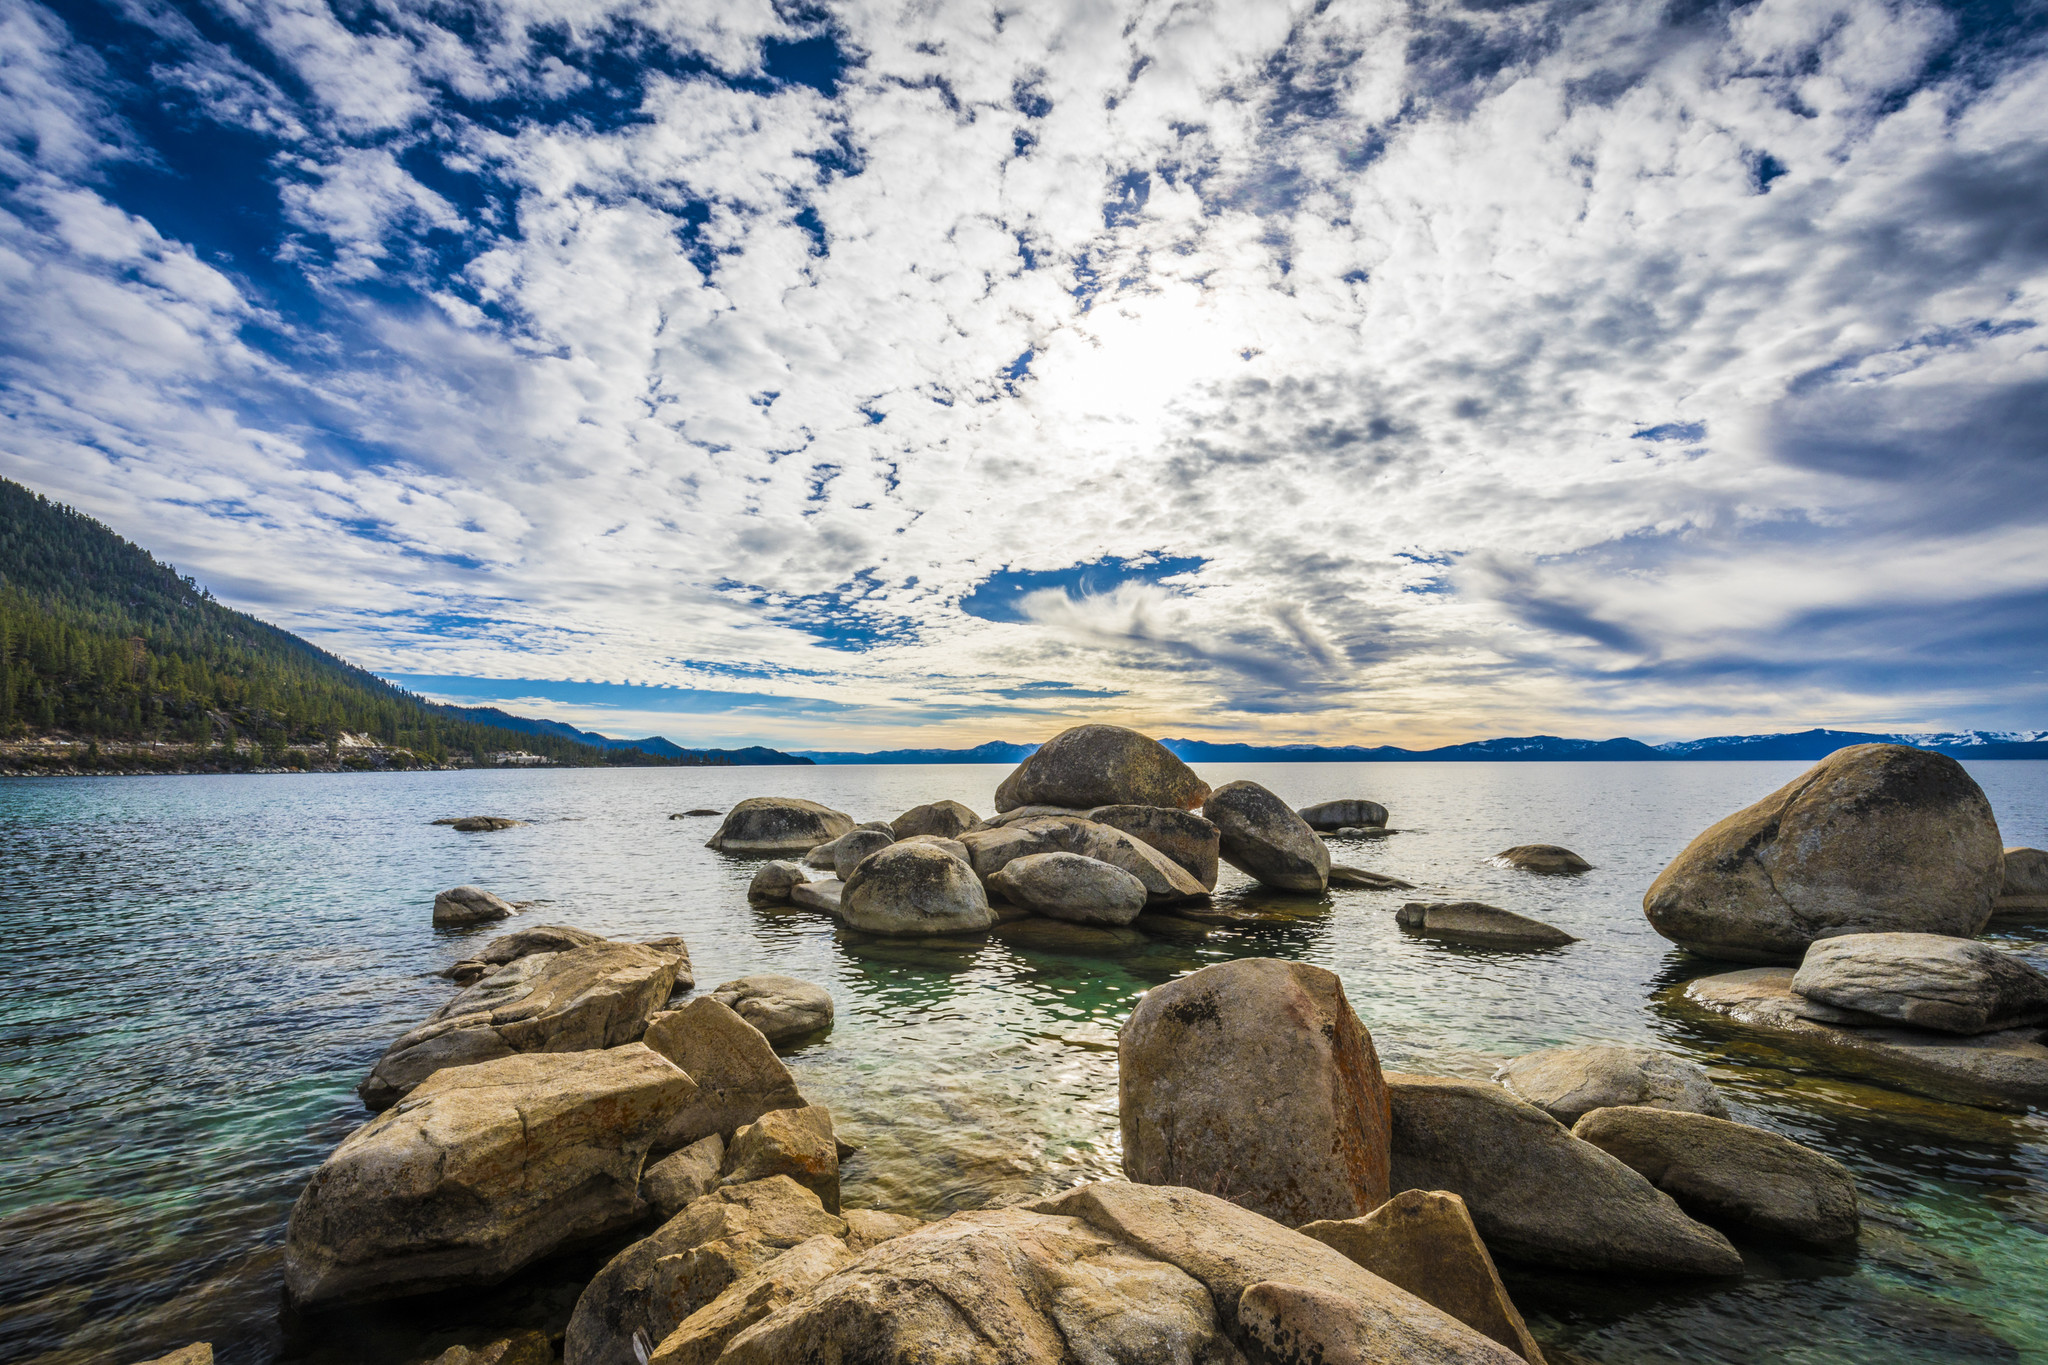 The Tahoe Fund - Creating a Sustainable Lake Tahoe